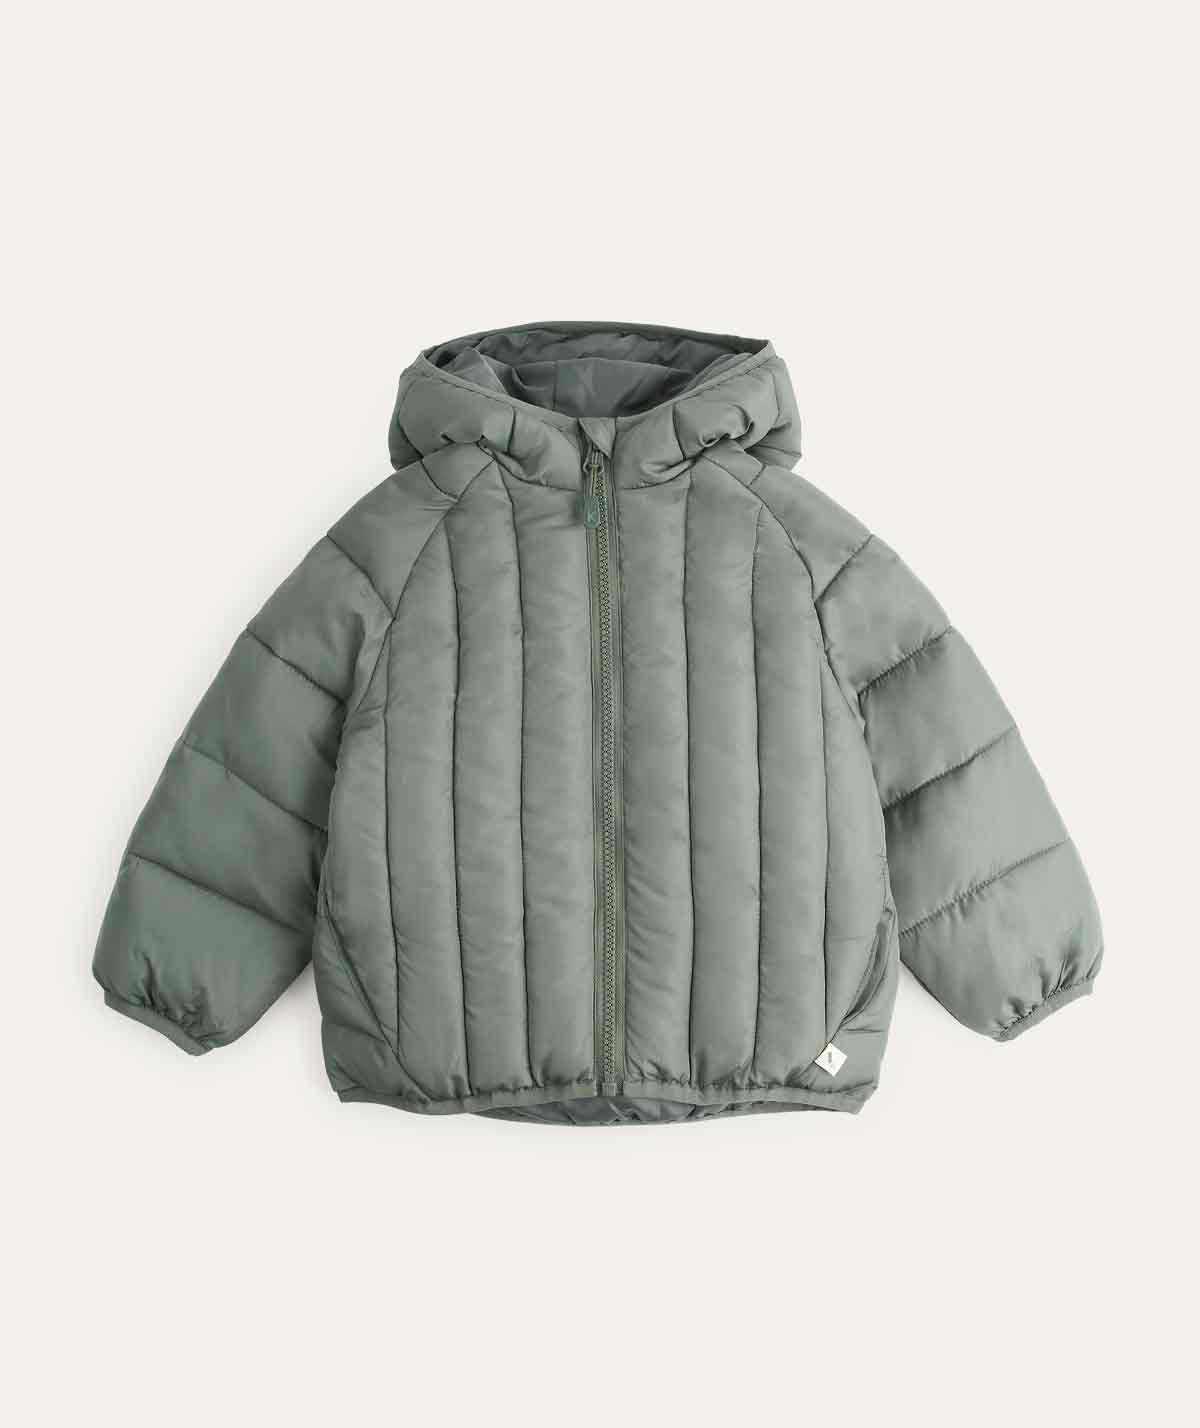 Buy the KIDLY Label Puffer Jacket online at KIDLY